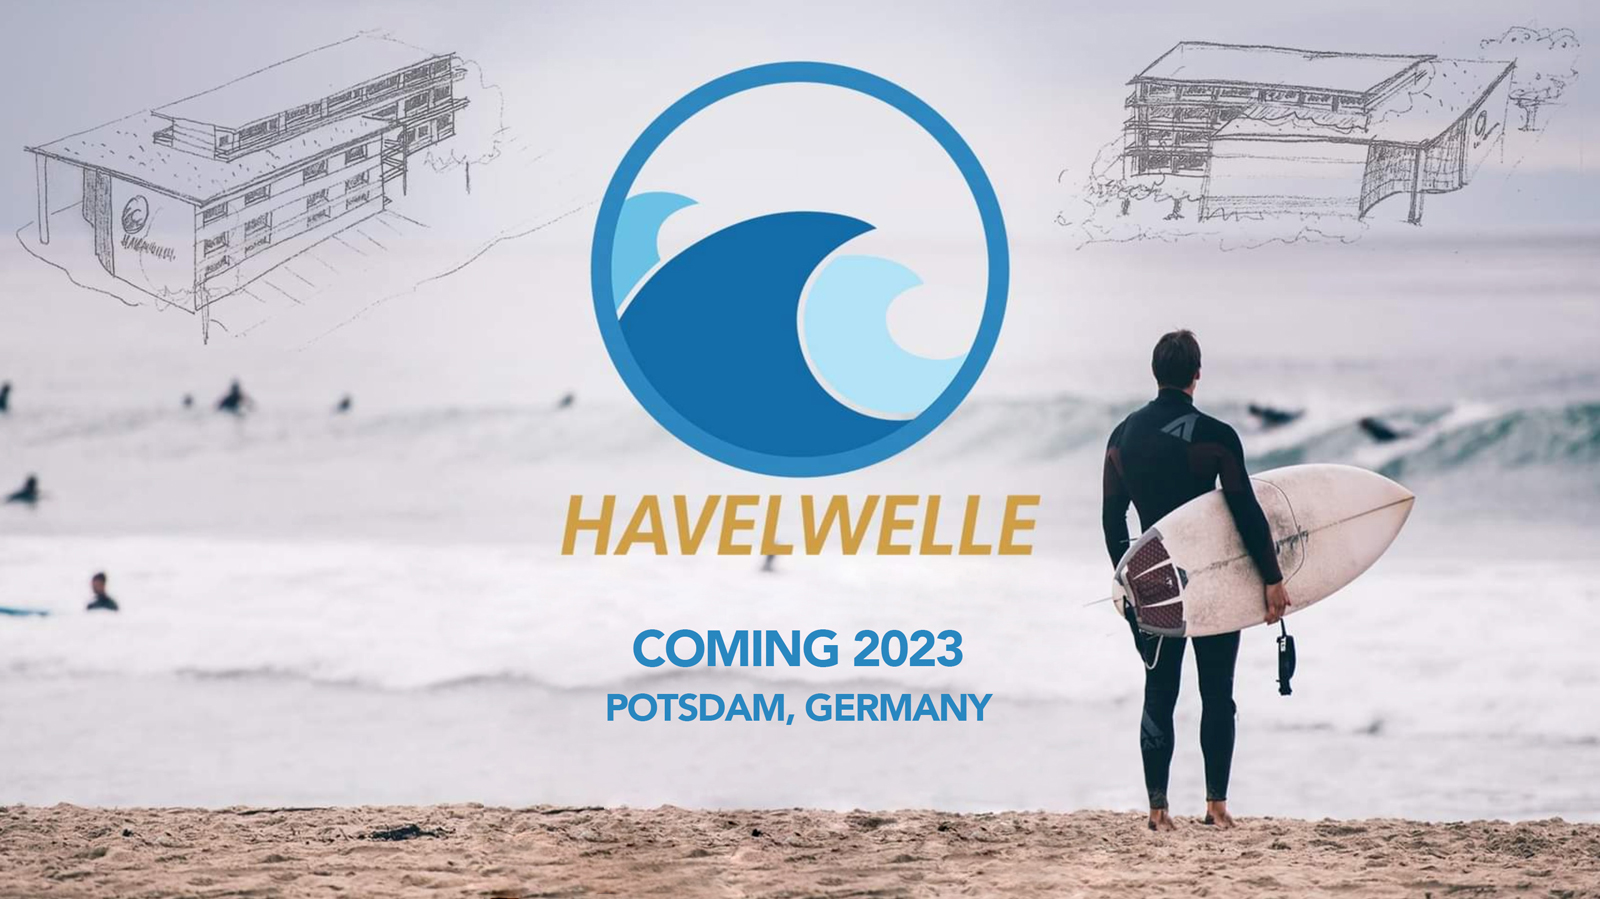 Havelwelle will feature a UNIT Surf Pool coming Summer 2023